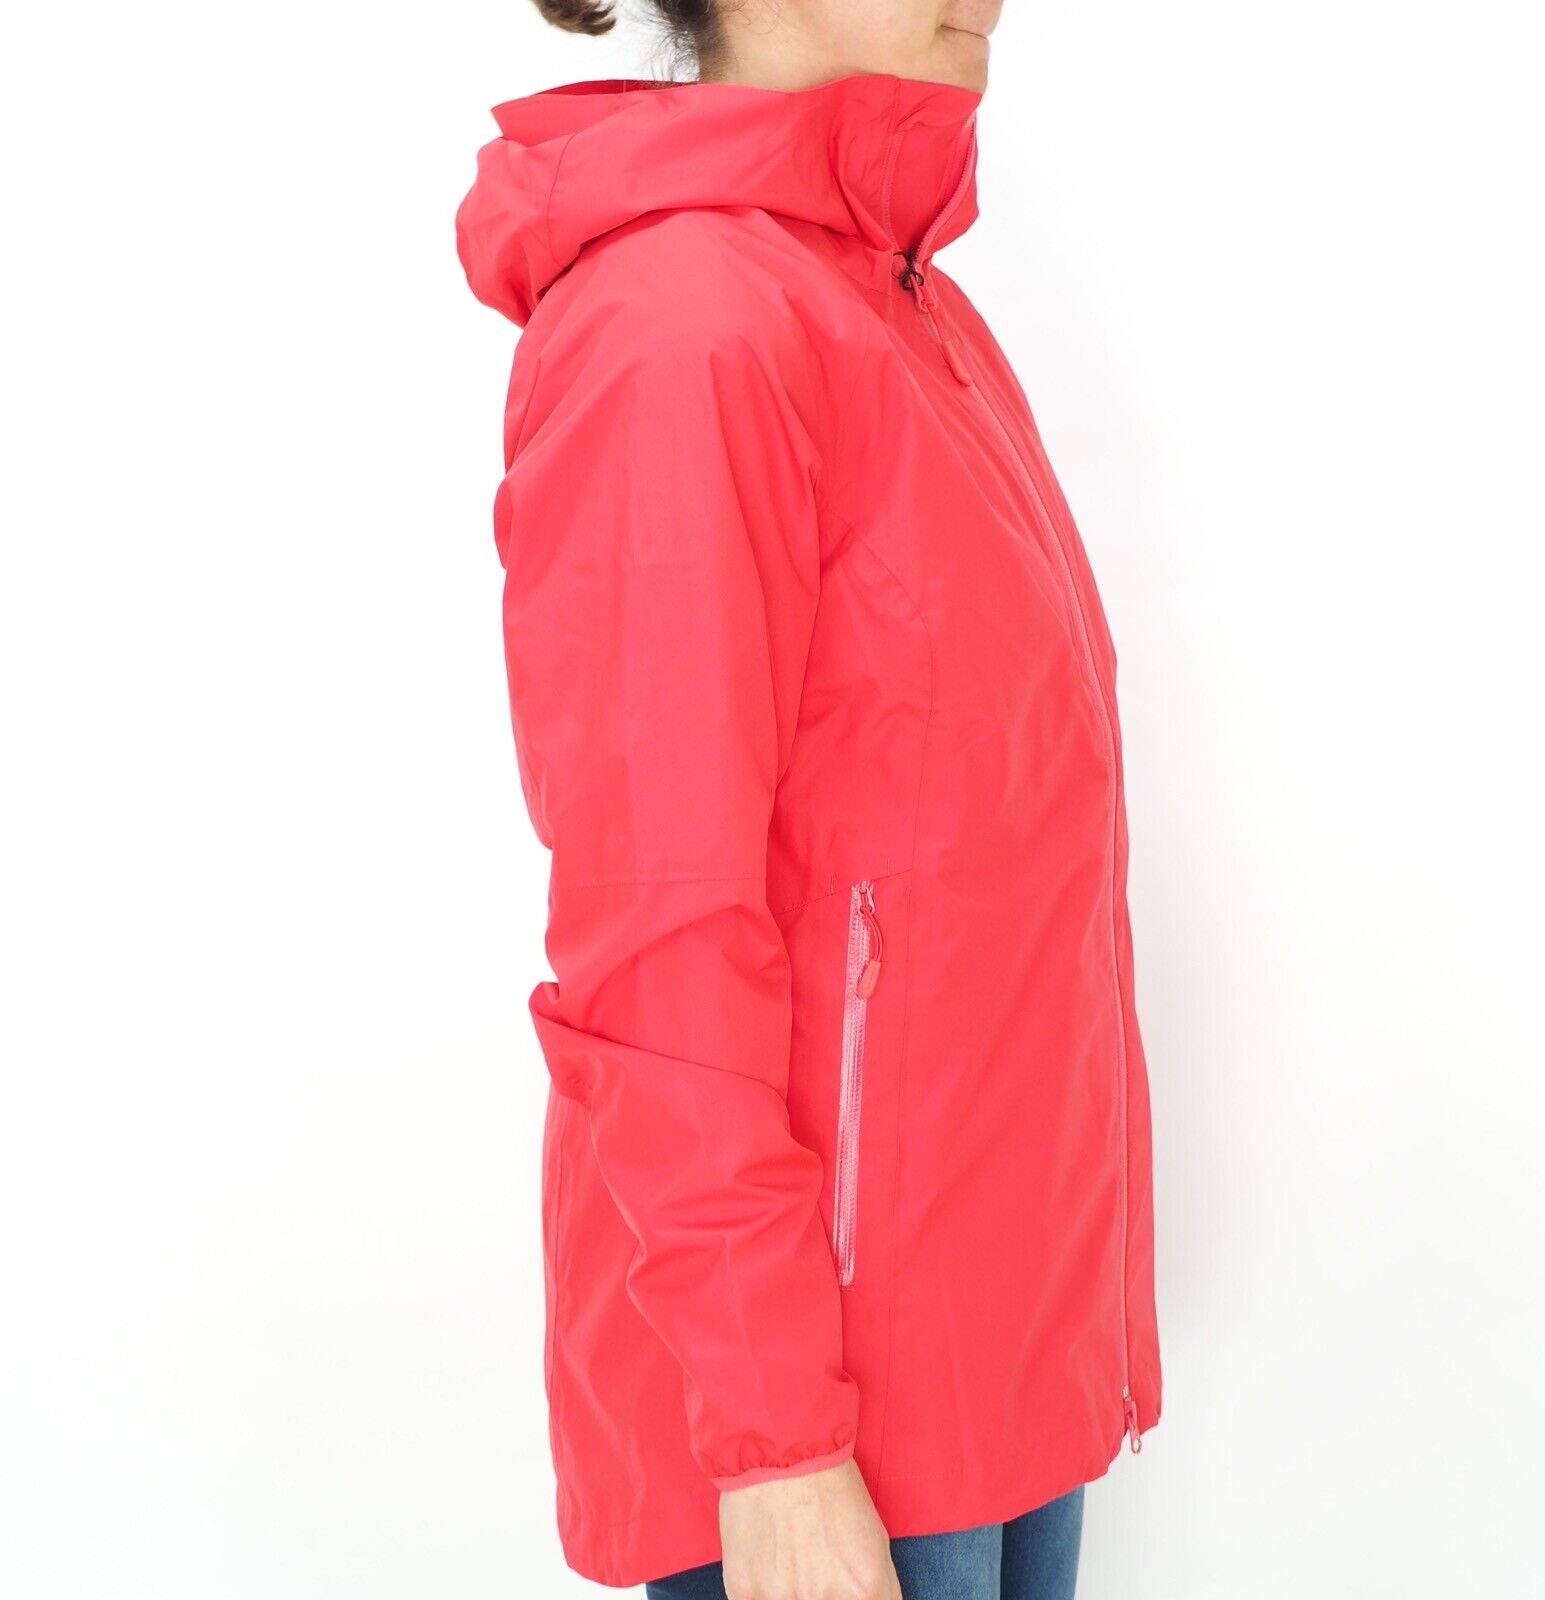 Womens Jack Wolfskin Barstow Trail 5016661 Tulip Red Zip Up Hooded Hiking Jacket - London Top Style